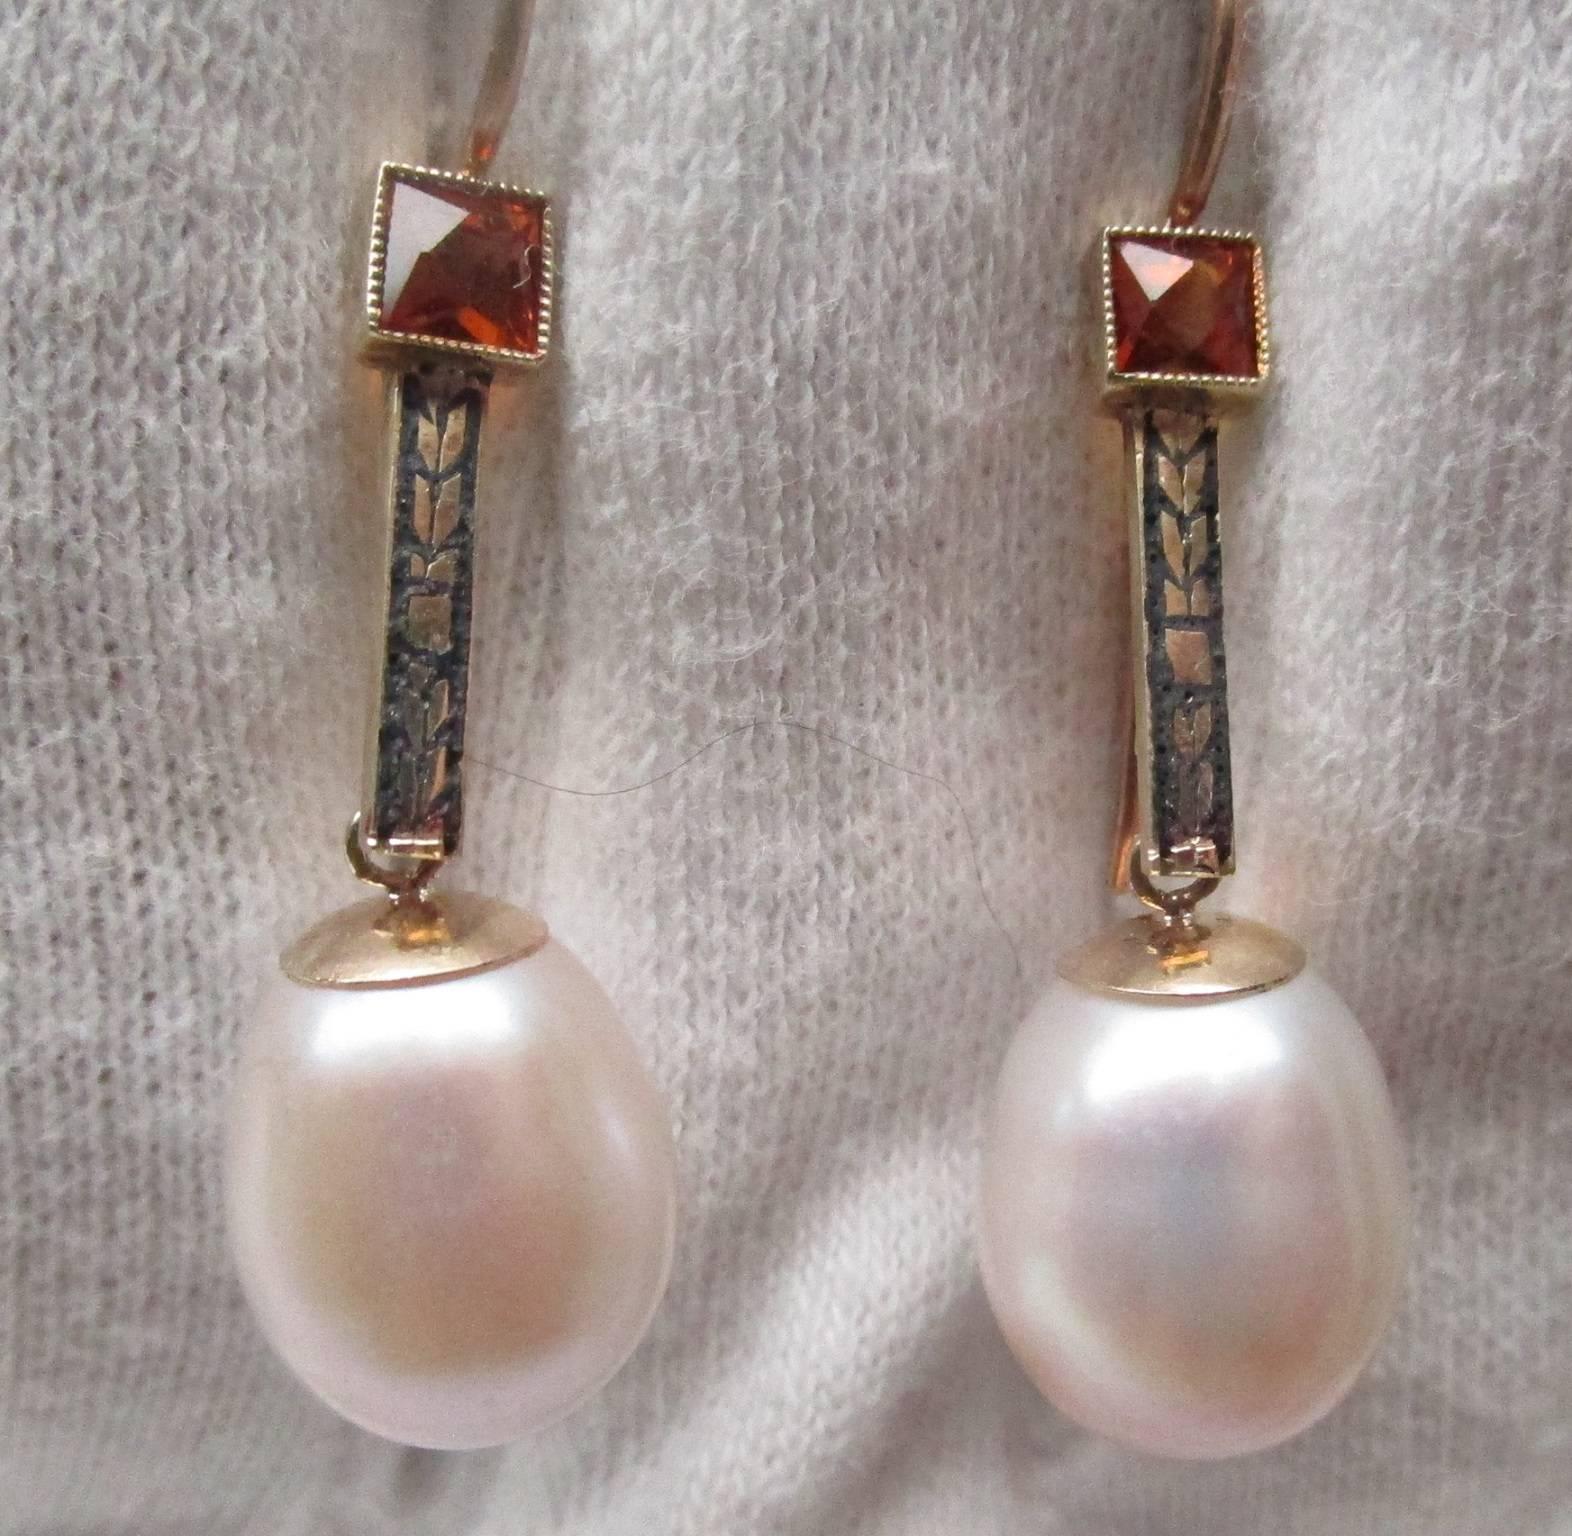 This is a stunning pair of Art Deco drop earrings with vitreous enamel, each graced with a square cut citrine and a large white baroque pearl.  You will not see another pair of earrings like these. They have great movement, but not so much that they